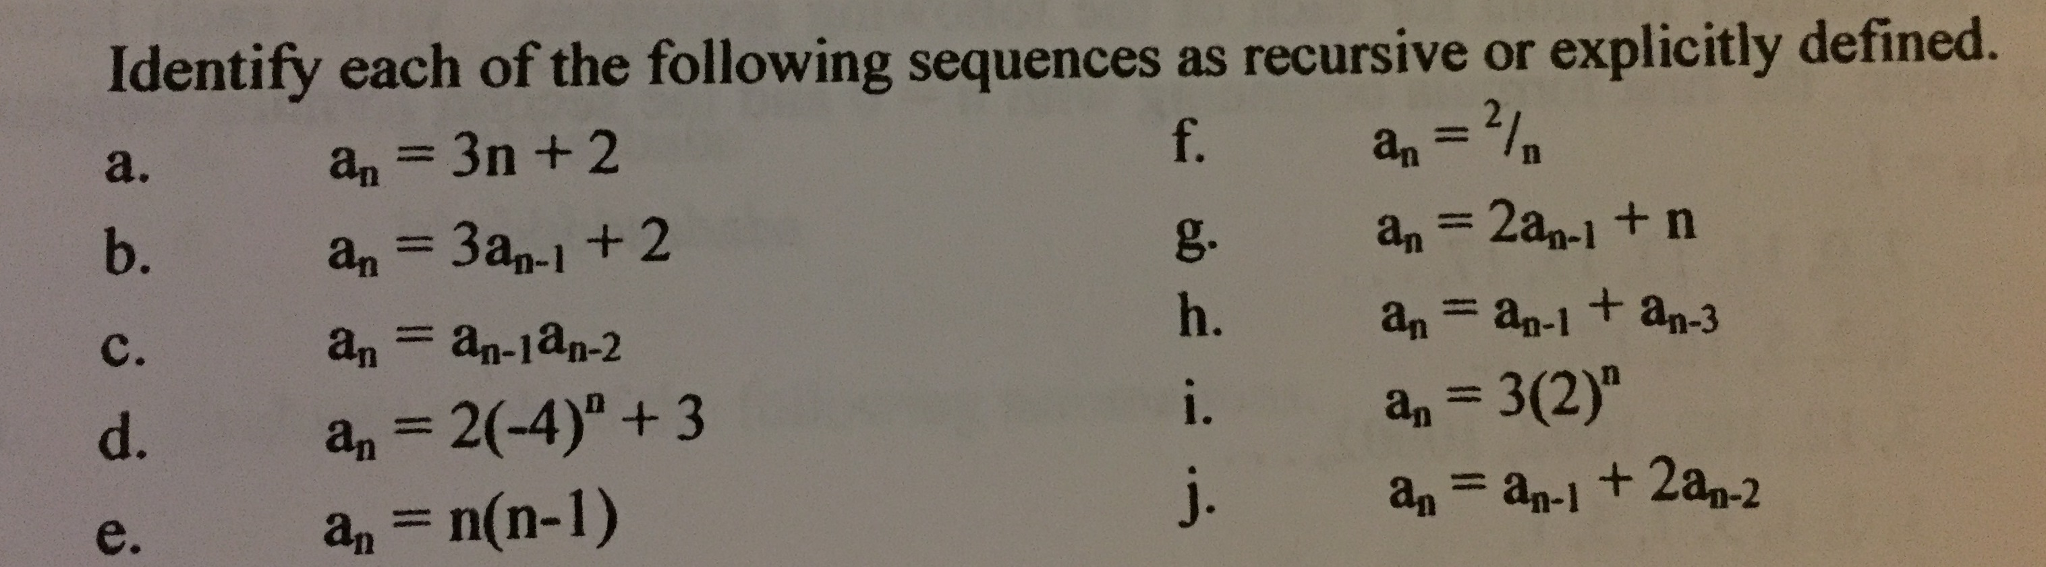 Solved: Identify Each Of The Following Sequences As Recurs... | Chegg.com